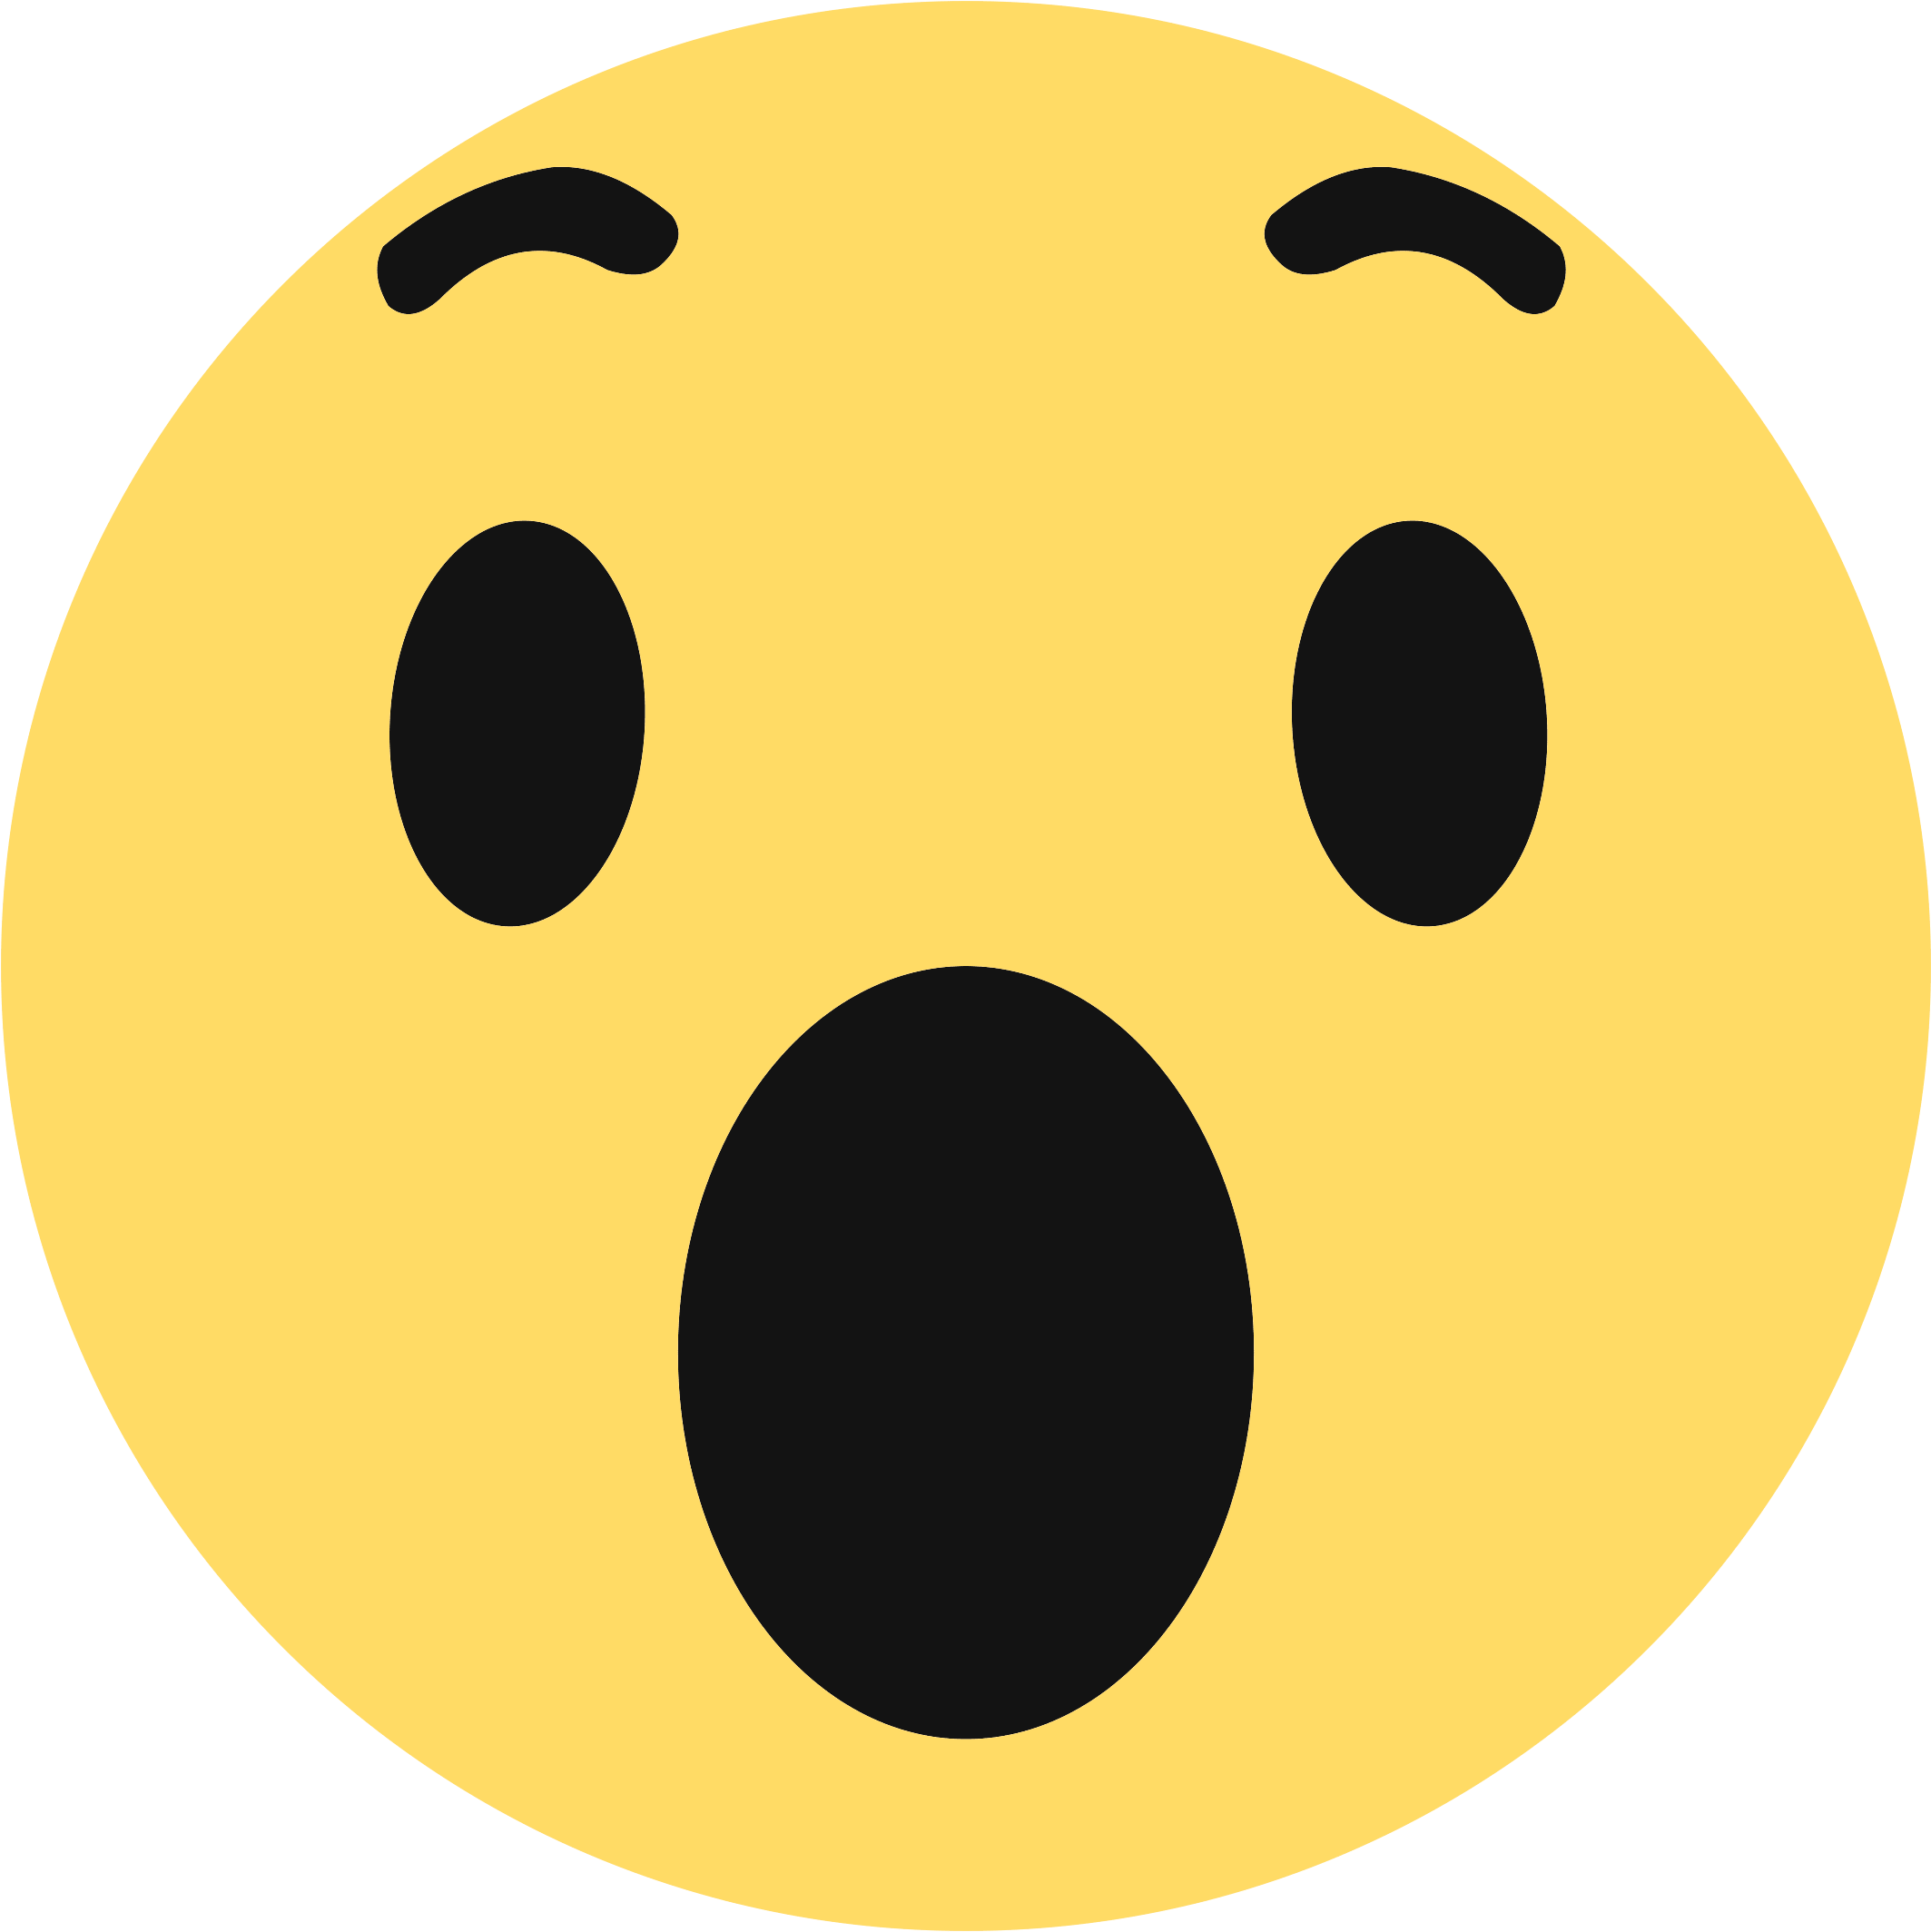 A Yellow Face With Black Eyes And Mouth Open